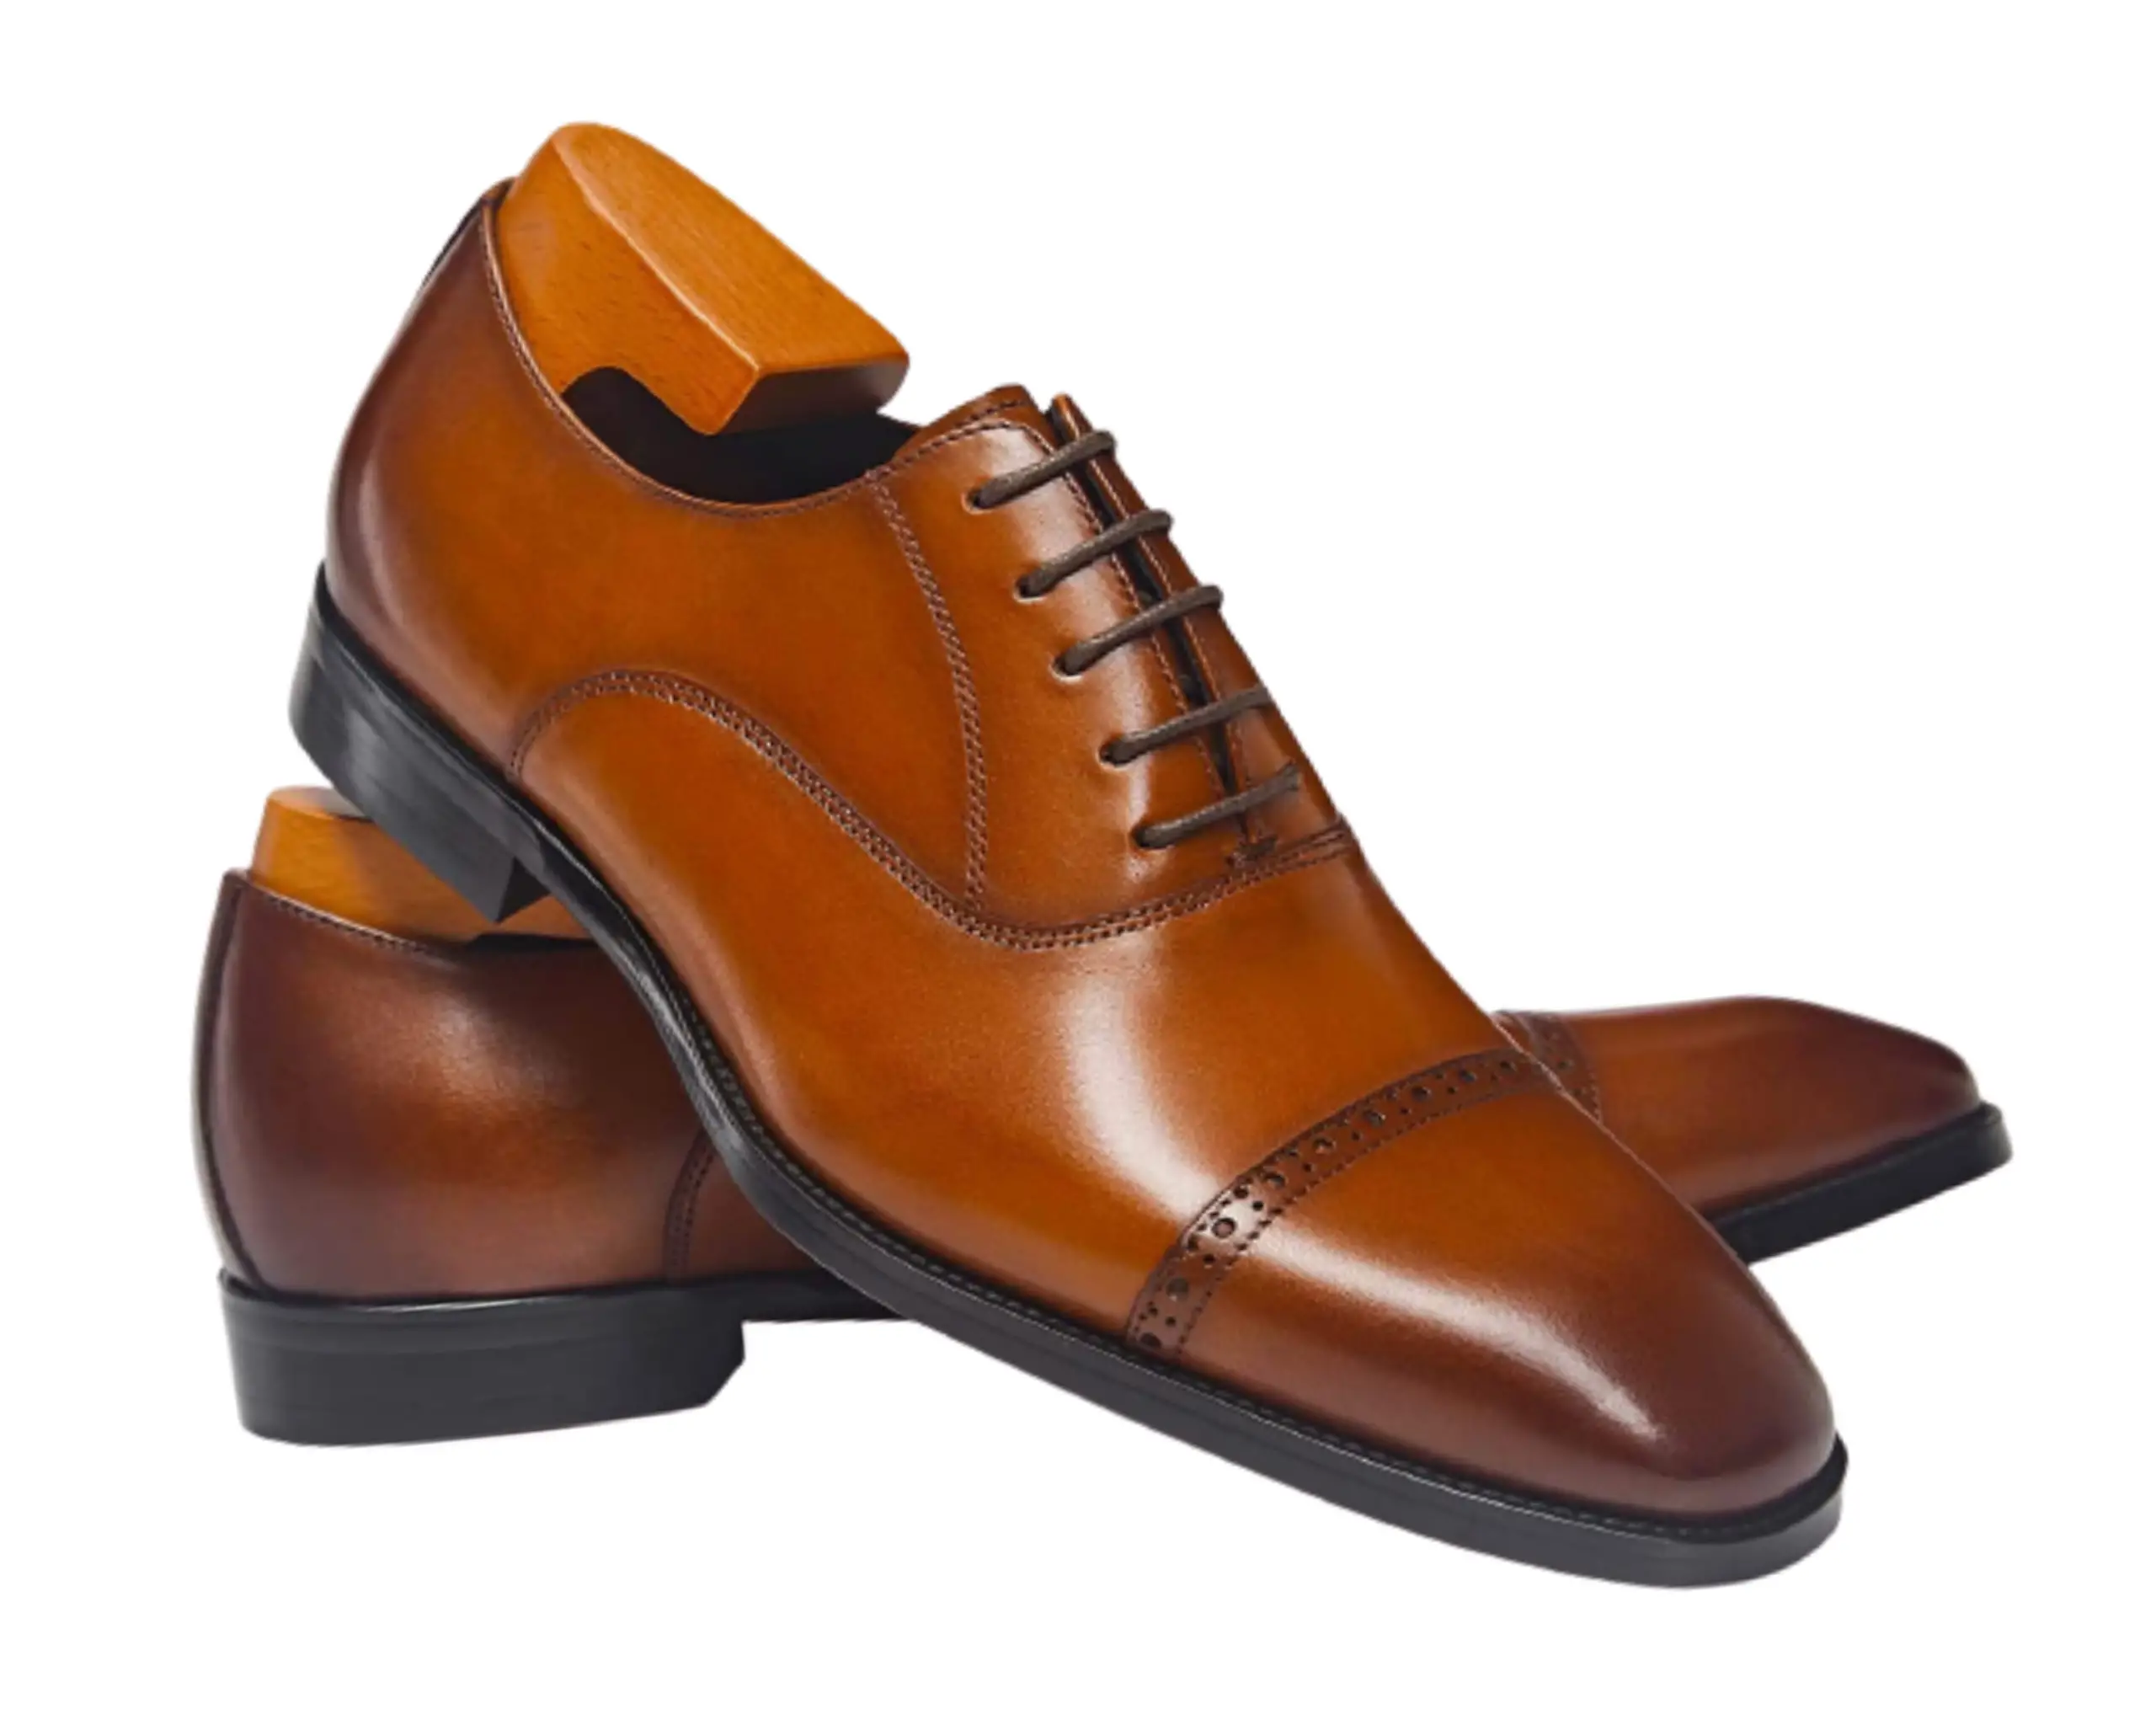 Men's Brown leather shoes